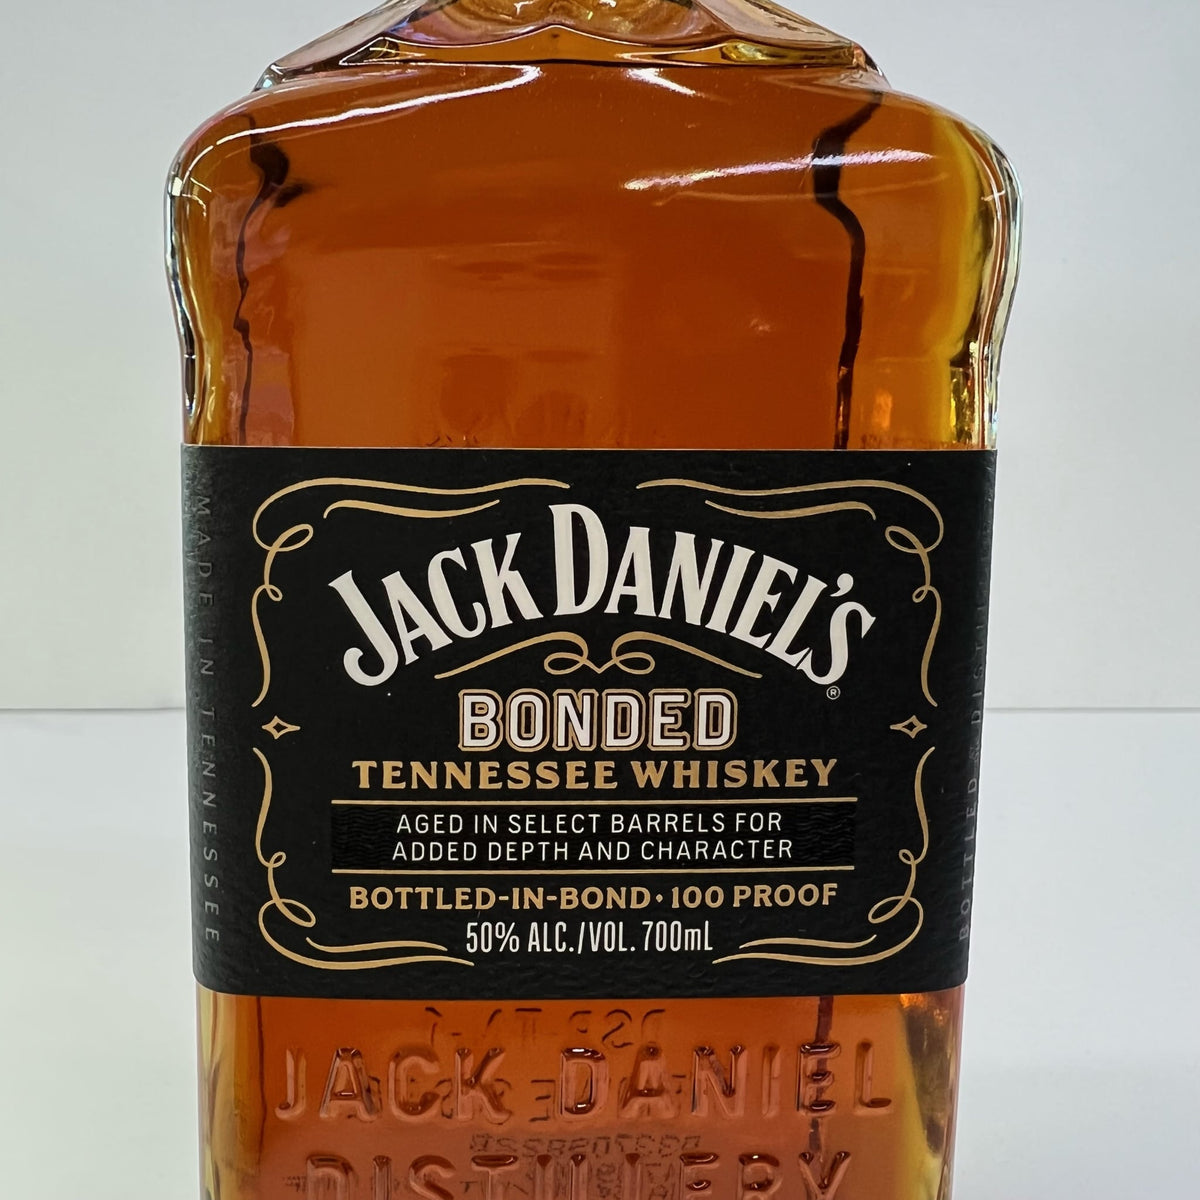 BUY] Jack Daniel's 100 Proof Bottled-in-Bond Tennessee Tennessee Whiskey